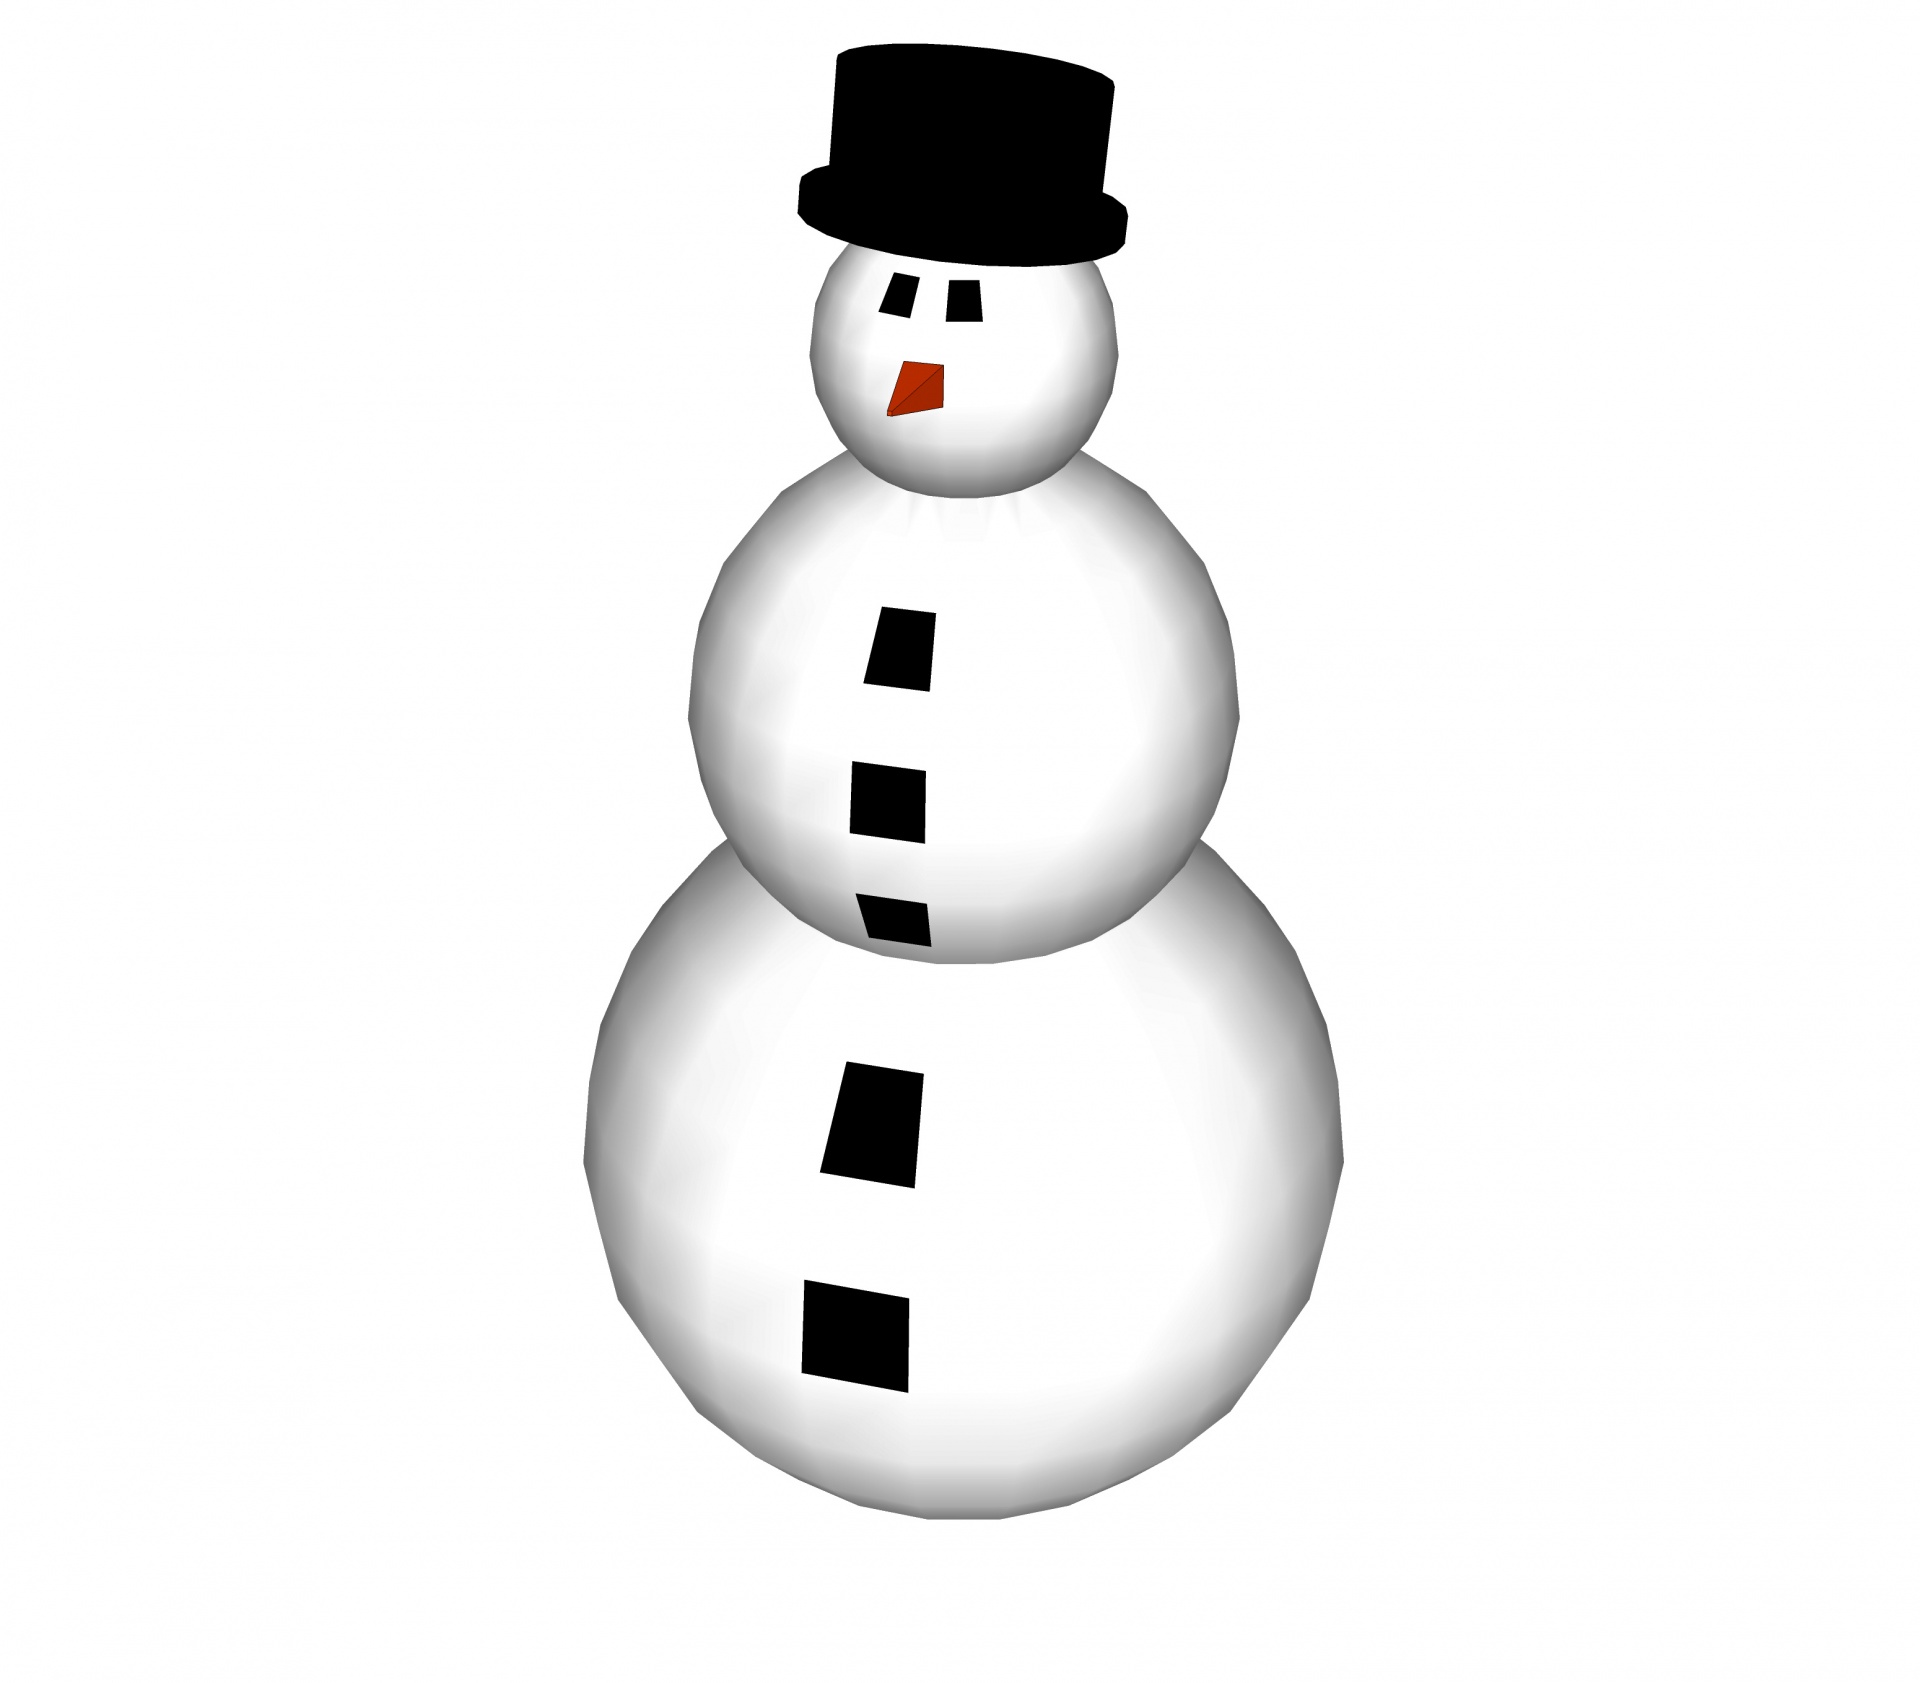 Drawing,3d,frosty,snowman,isolated - free photo from needpix.com AMP.